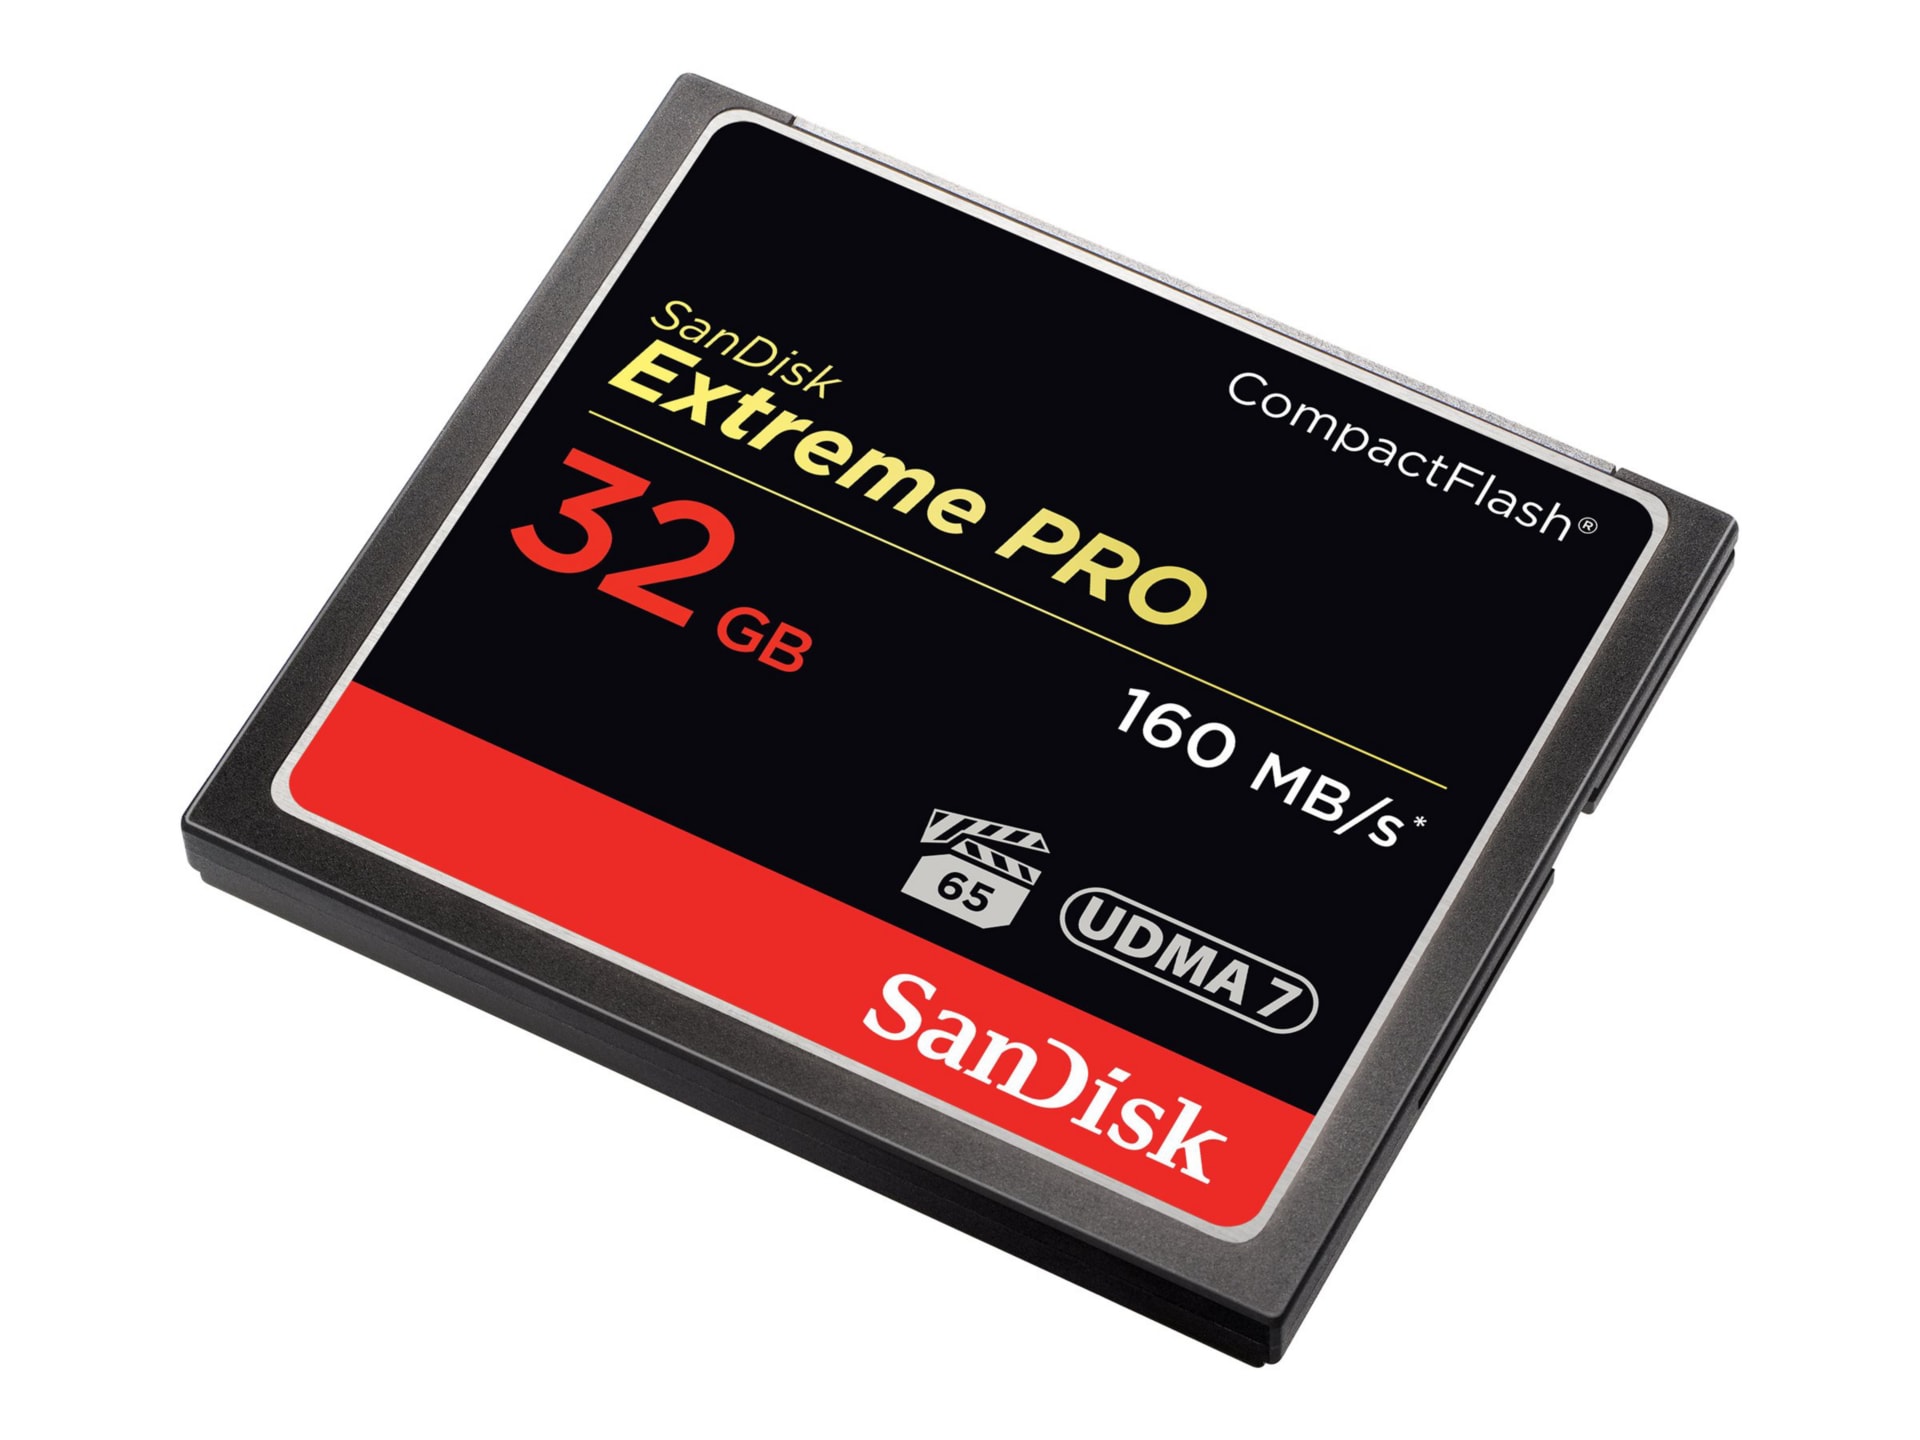  SanDisk 32GB Extreme Pro CF memory card - UDMA 90MB/s 600x  (SDCFXP-032G-A91, US Retail Package) : Electronics